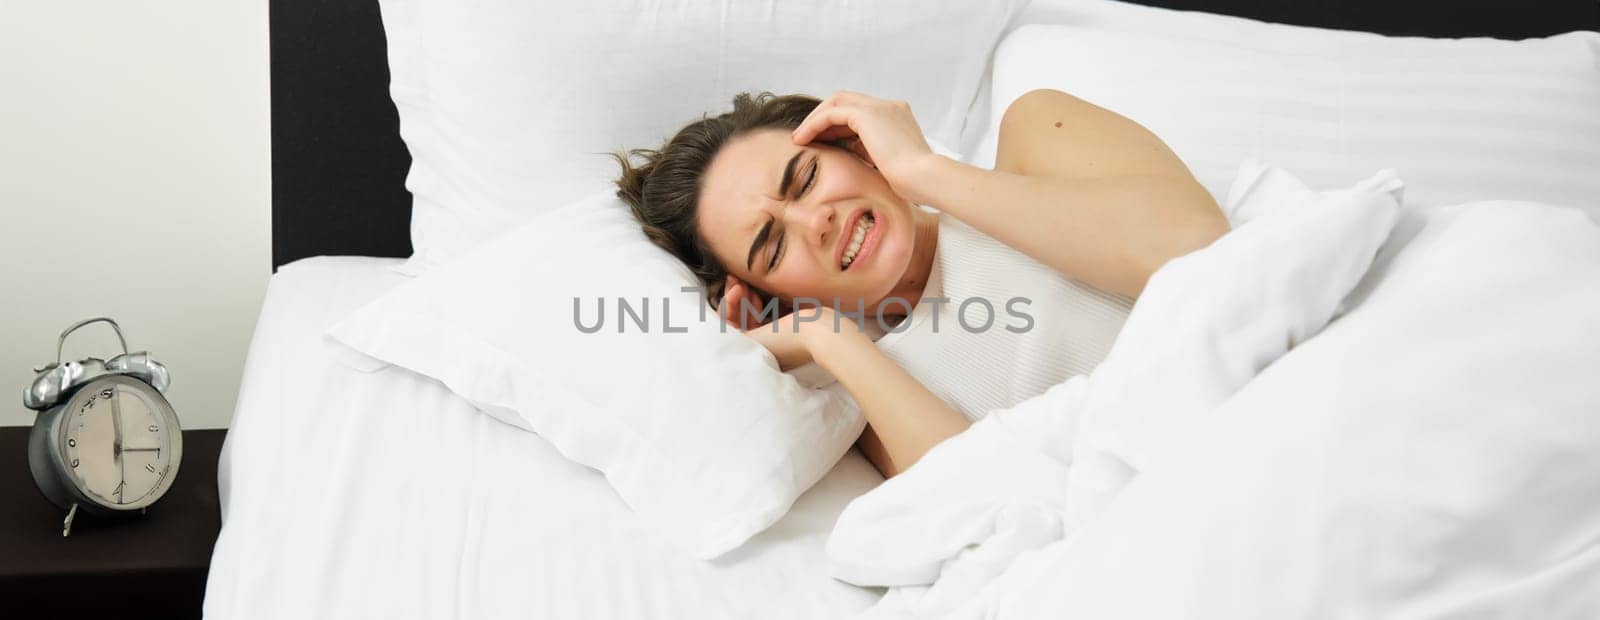 Portrait of woman with headache, lying in bed and suffering from migraine, touching head and grimacing from discomfort.